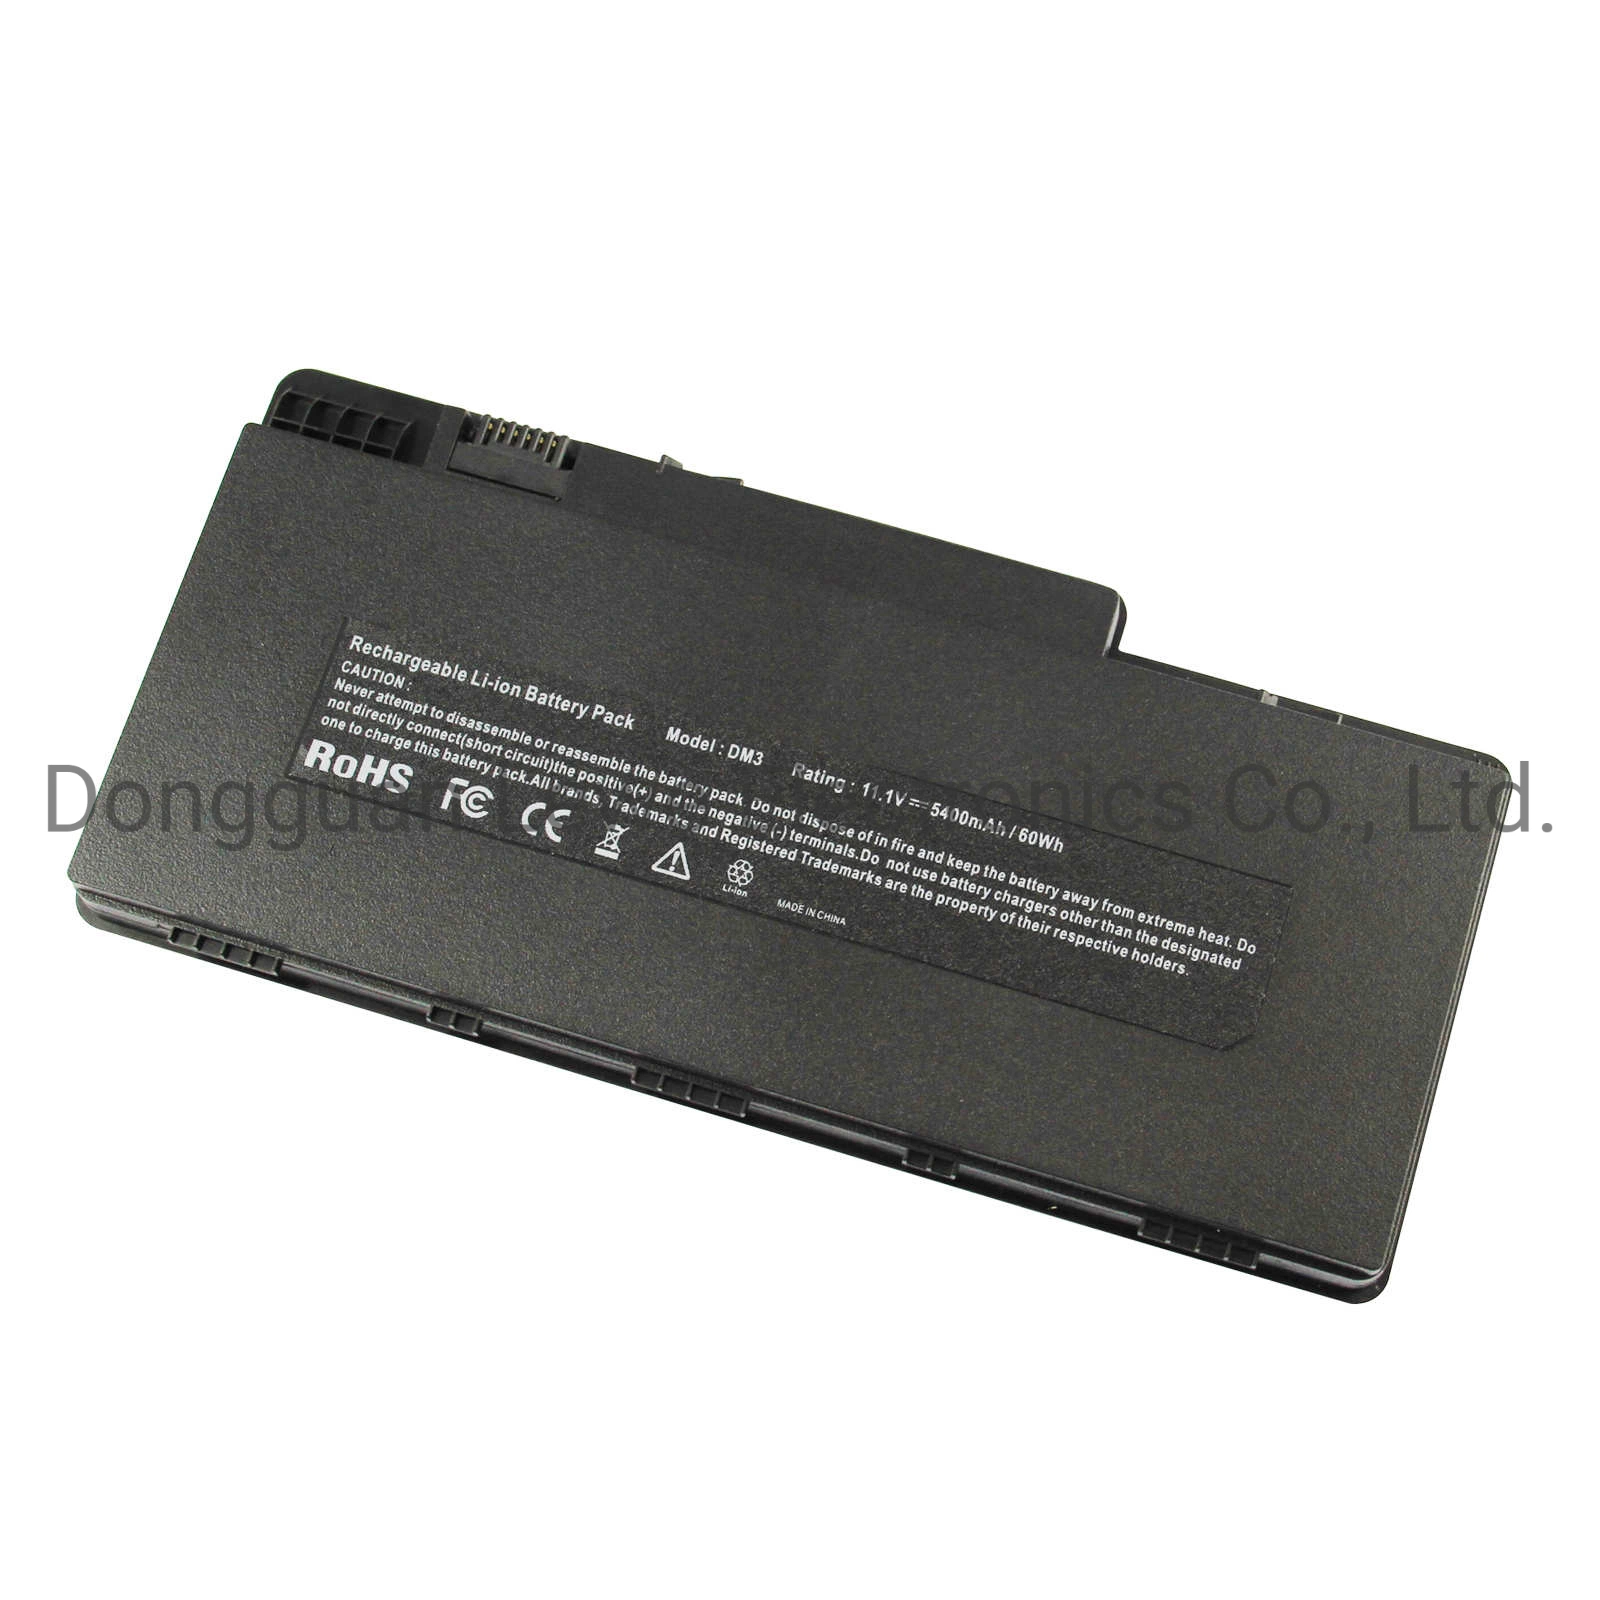 Replacement Li-ion Laptop Notebook Computer Battery for HP Dm3 11.1V 5400mAh 6cells Laptop Battery Pack